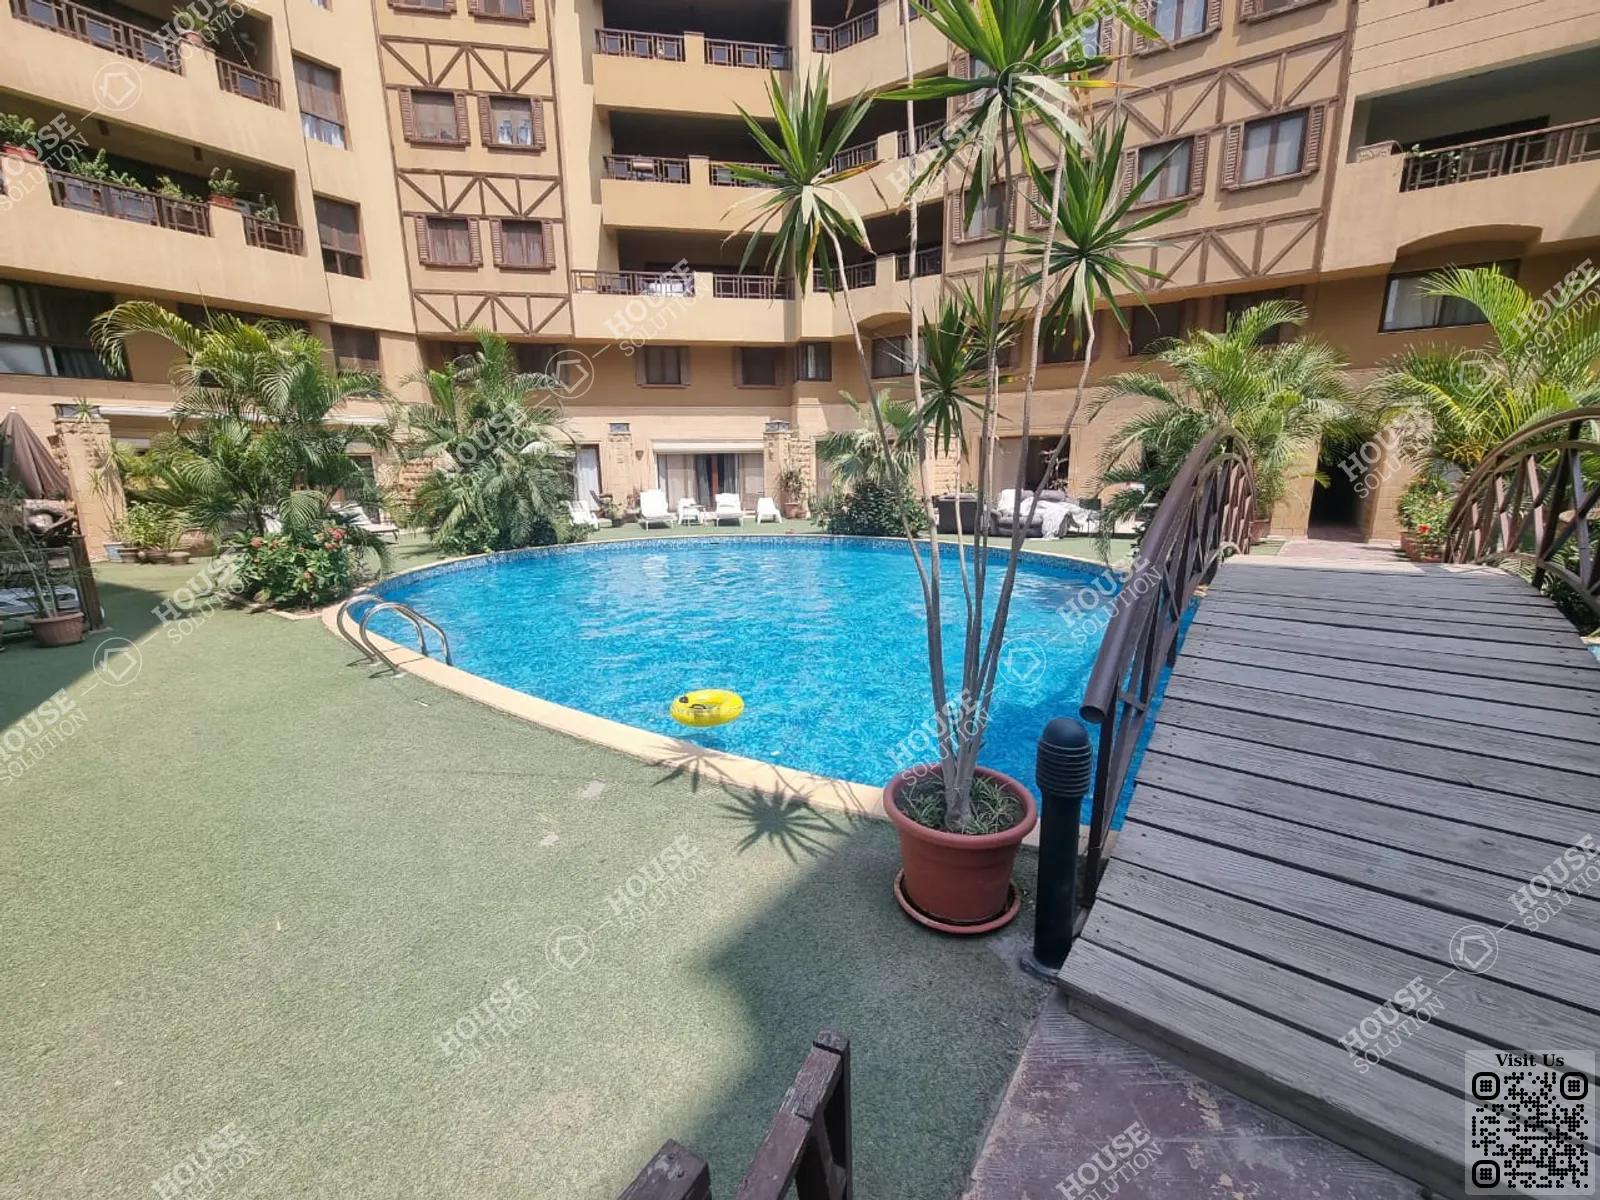 SHARED SWIMMING POOL  @ Apartments For Rent In Maadi Maadi Sarayat Area: 320 m² consists of 3 Bedrooms 5 Bathrooms Modern furnished 5 stars #5671-1